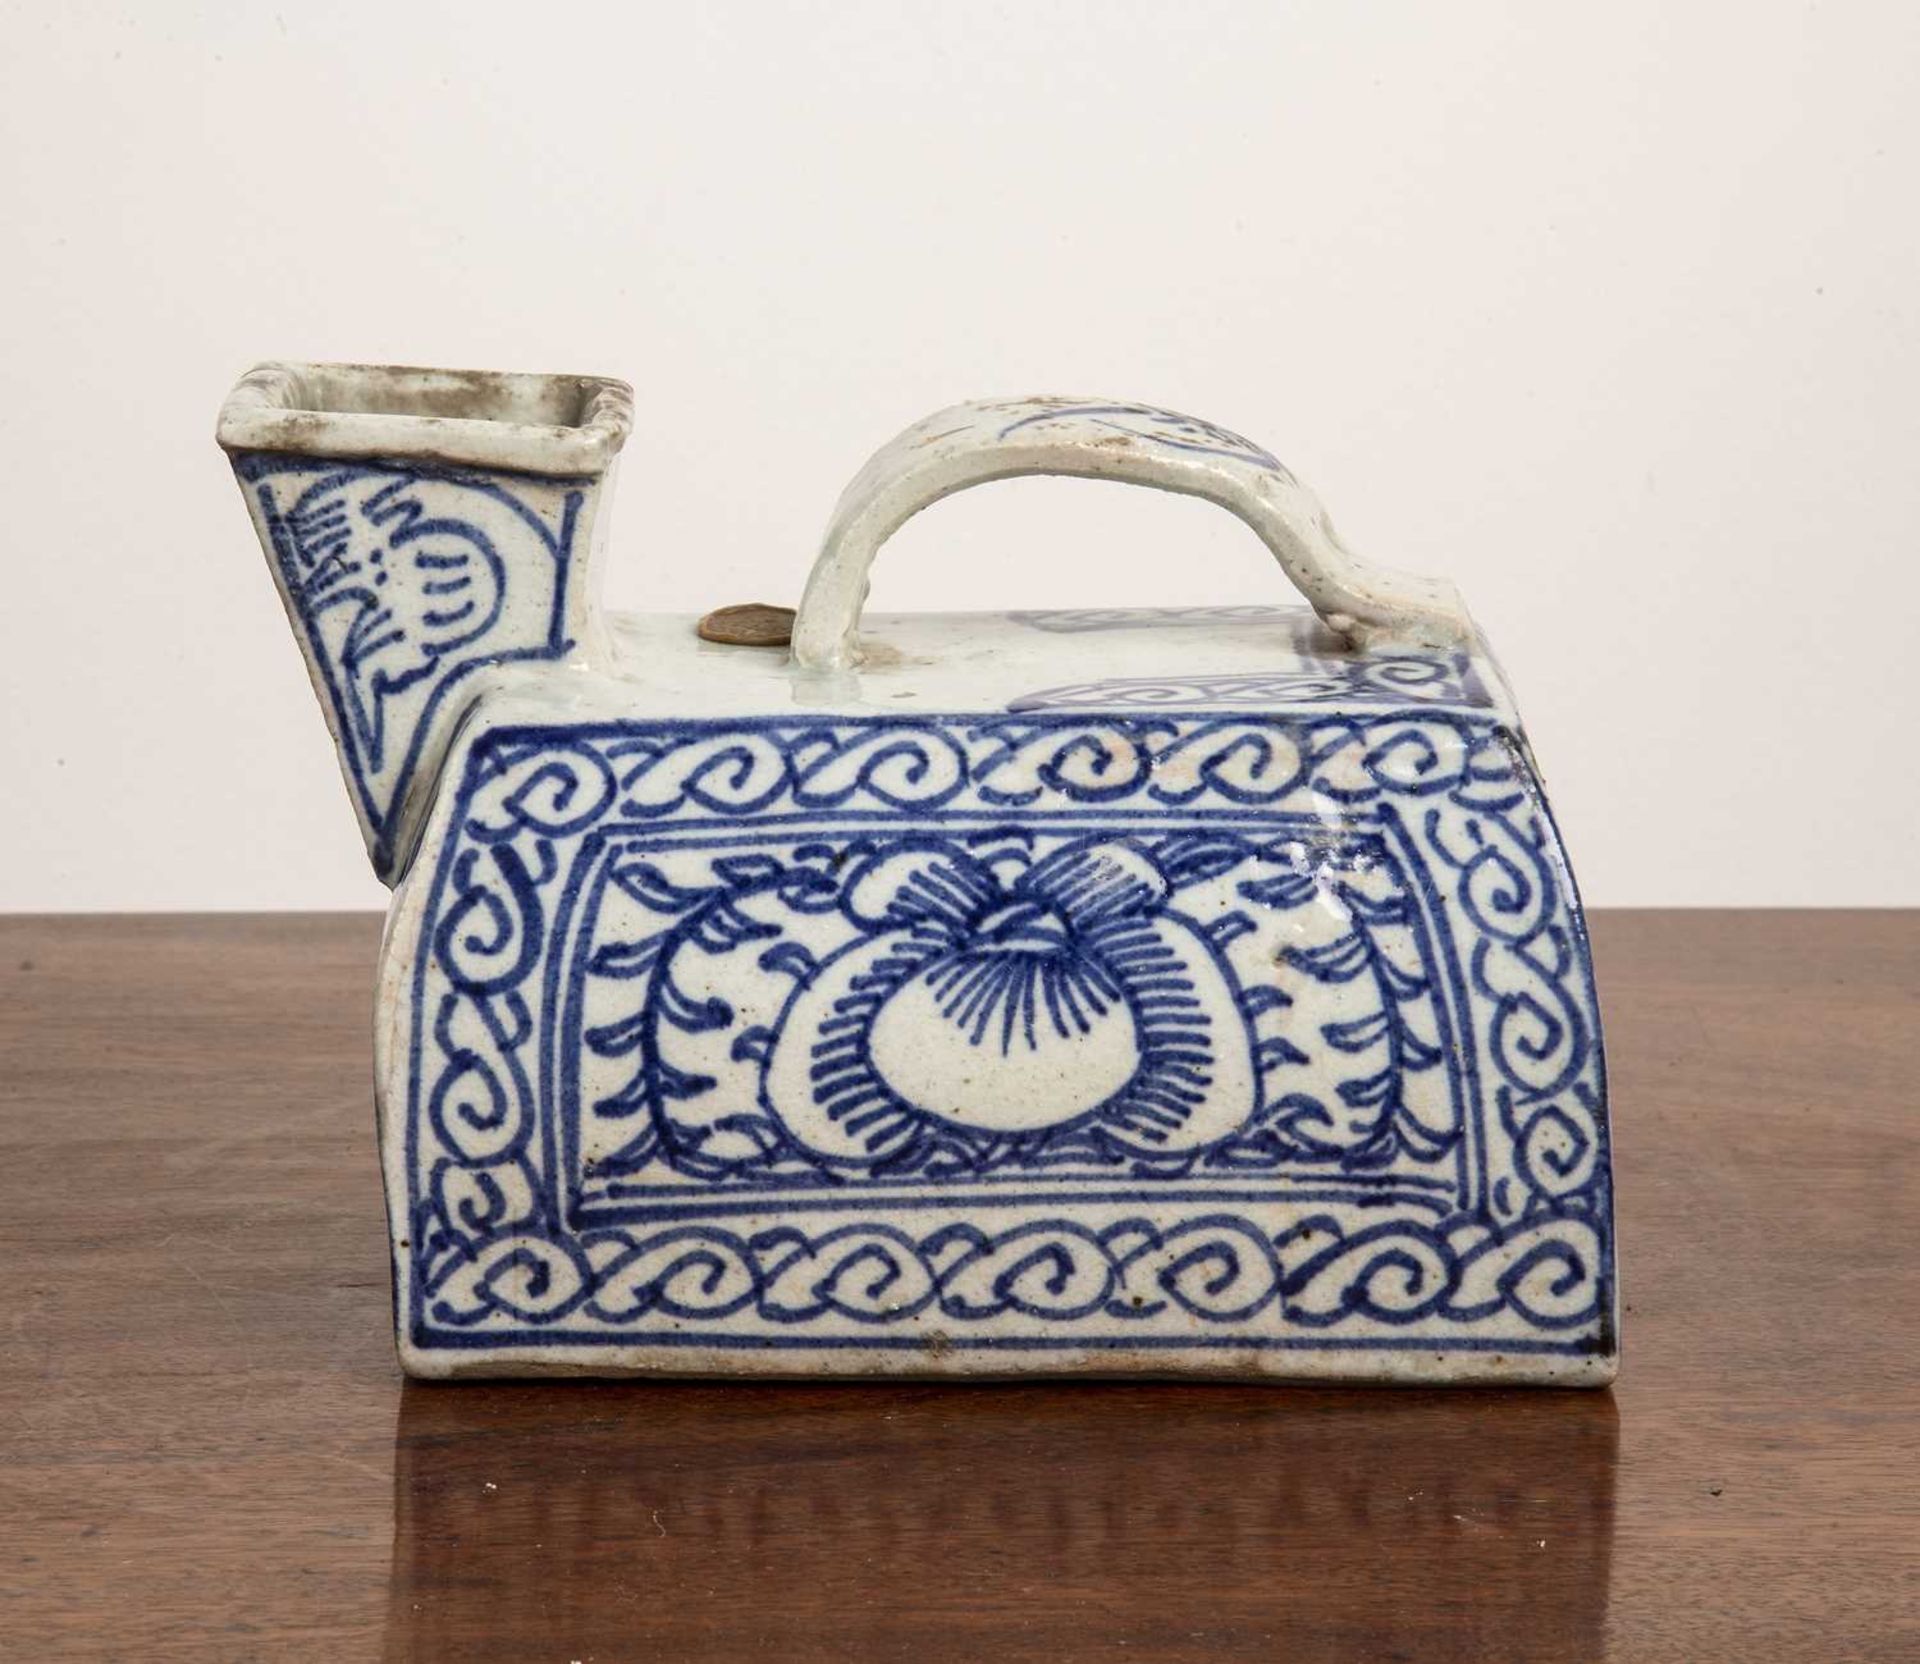 Blue and white porcelain bourdaloue Chinese, decorated with repeating blue and white motifs, with - Image 4 of 6